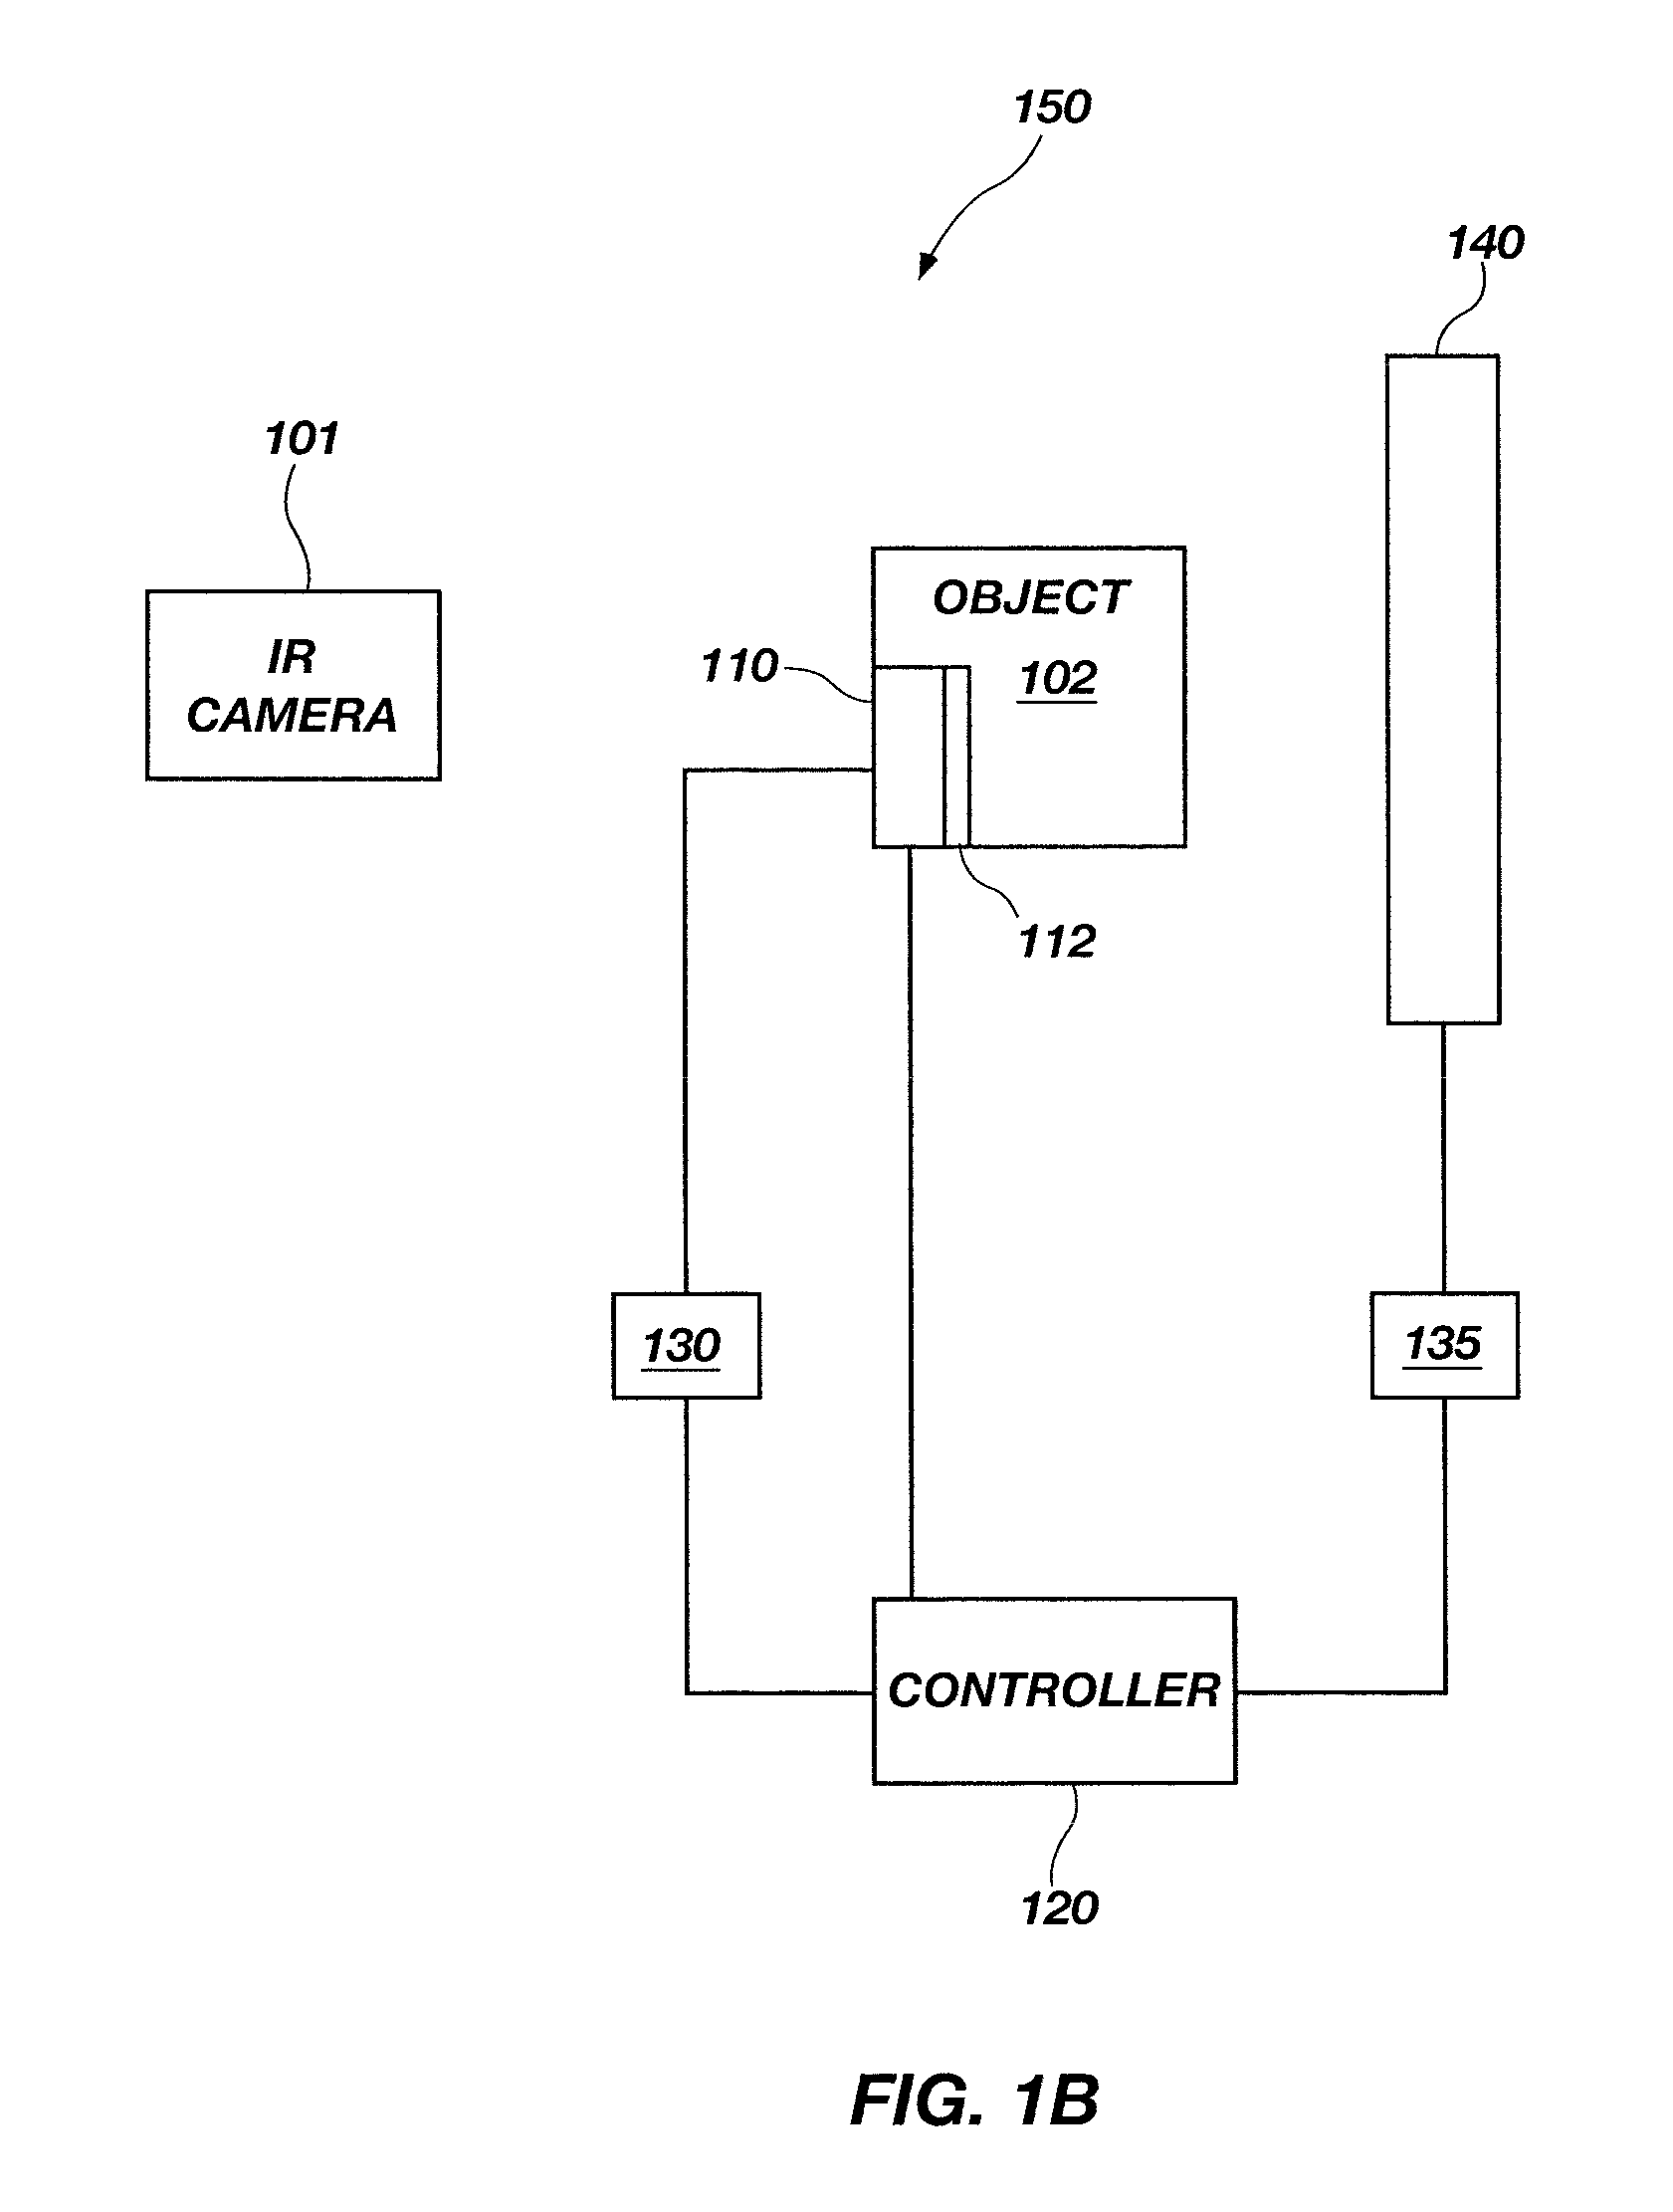 Infrared signature matching system, control circuit, and related method